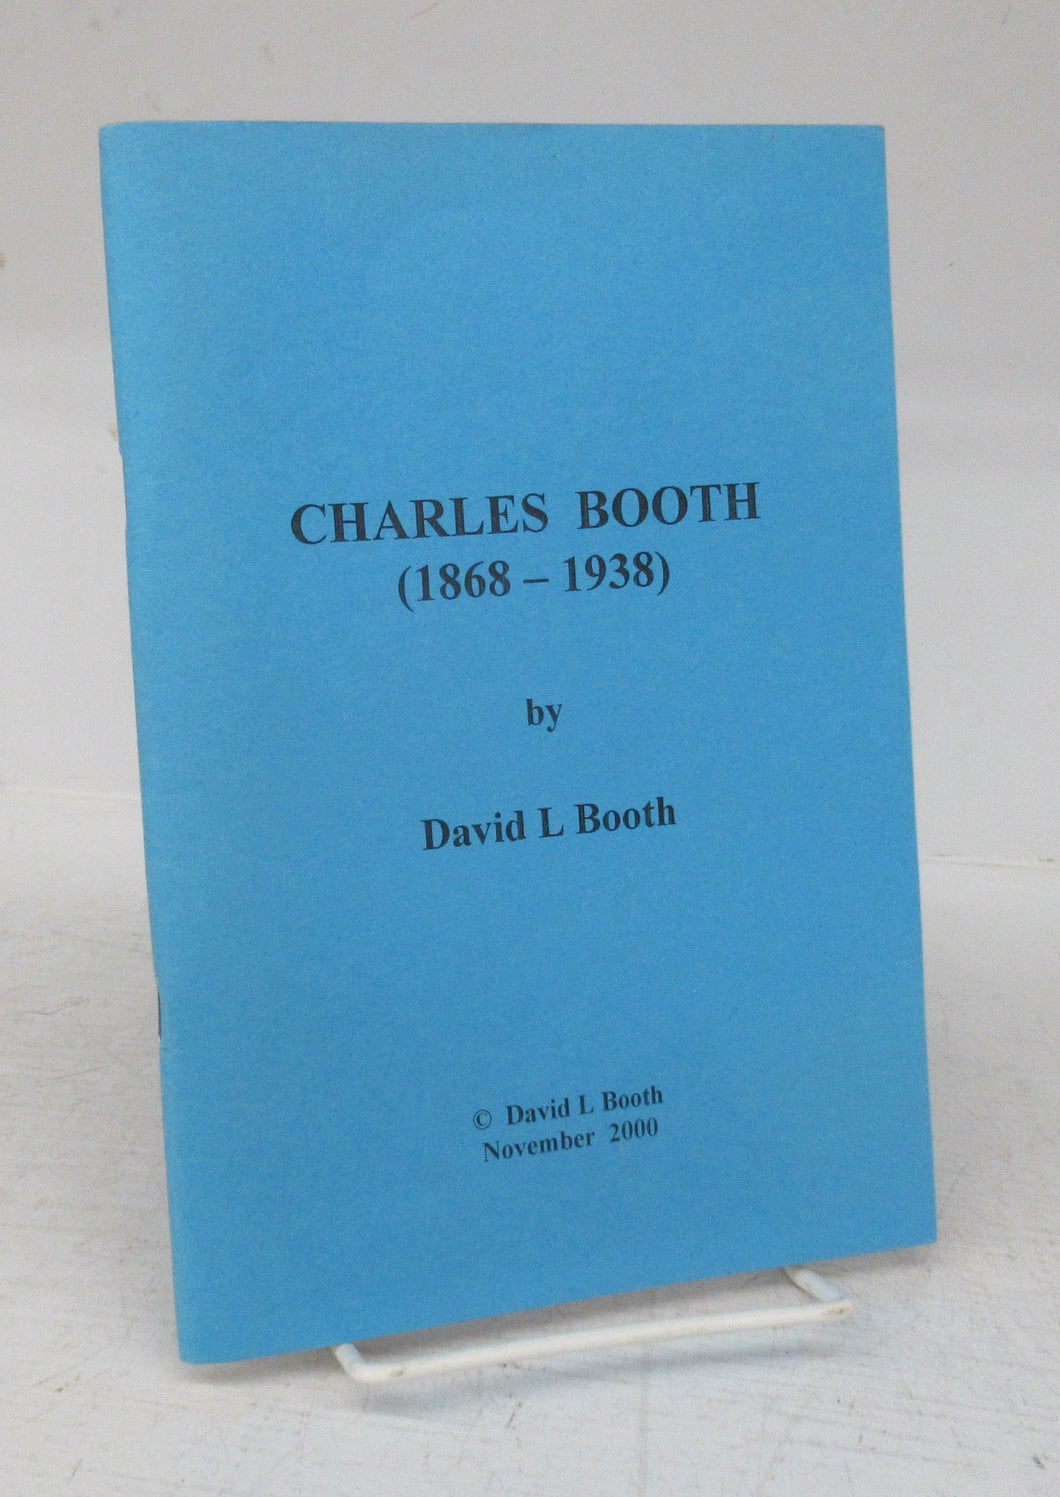 Charles Booth (1868-1938)